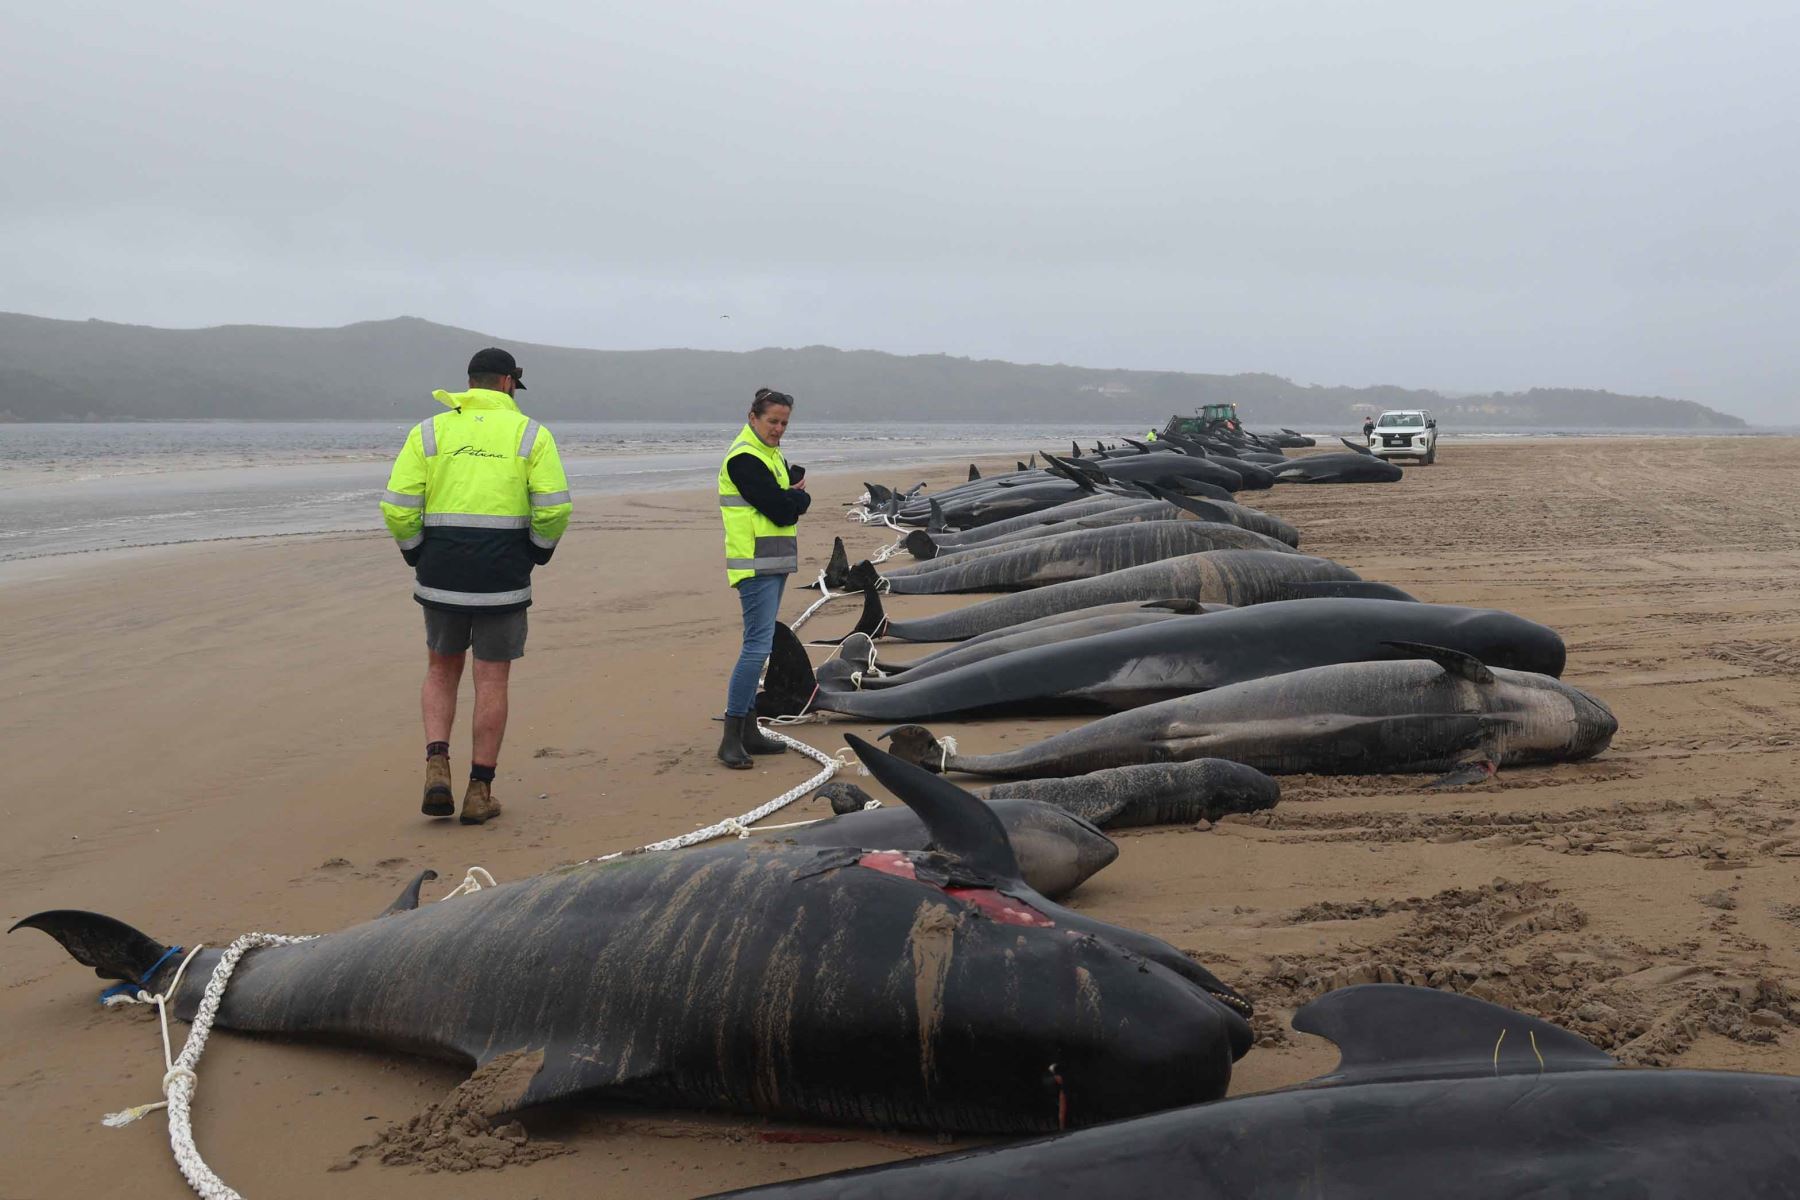 Nearly 200 Pilot Whales Died On A Beach In Macquarie Bay, West Of The Australian Island Of Tasmania, And 35 Were Rescued Alive After Being Largely Stranded In This Remote Location, Country Officials Reported On Thursday.